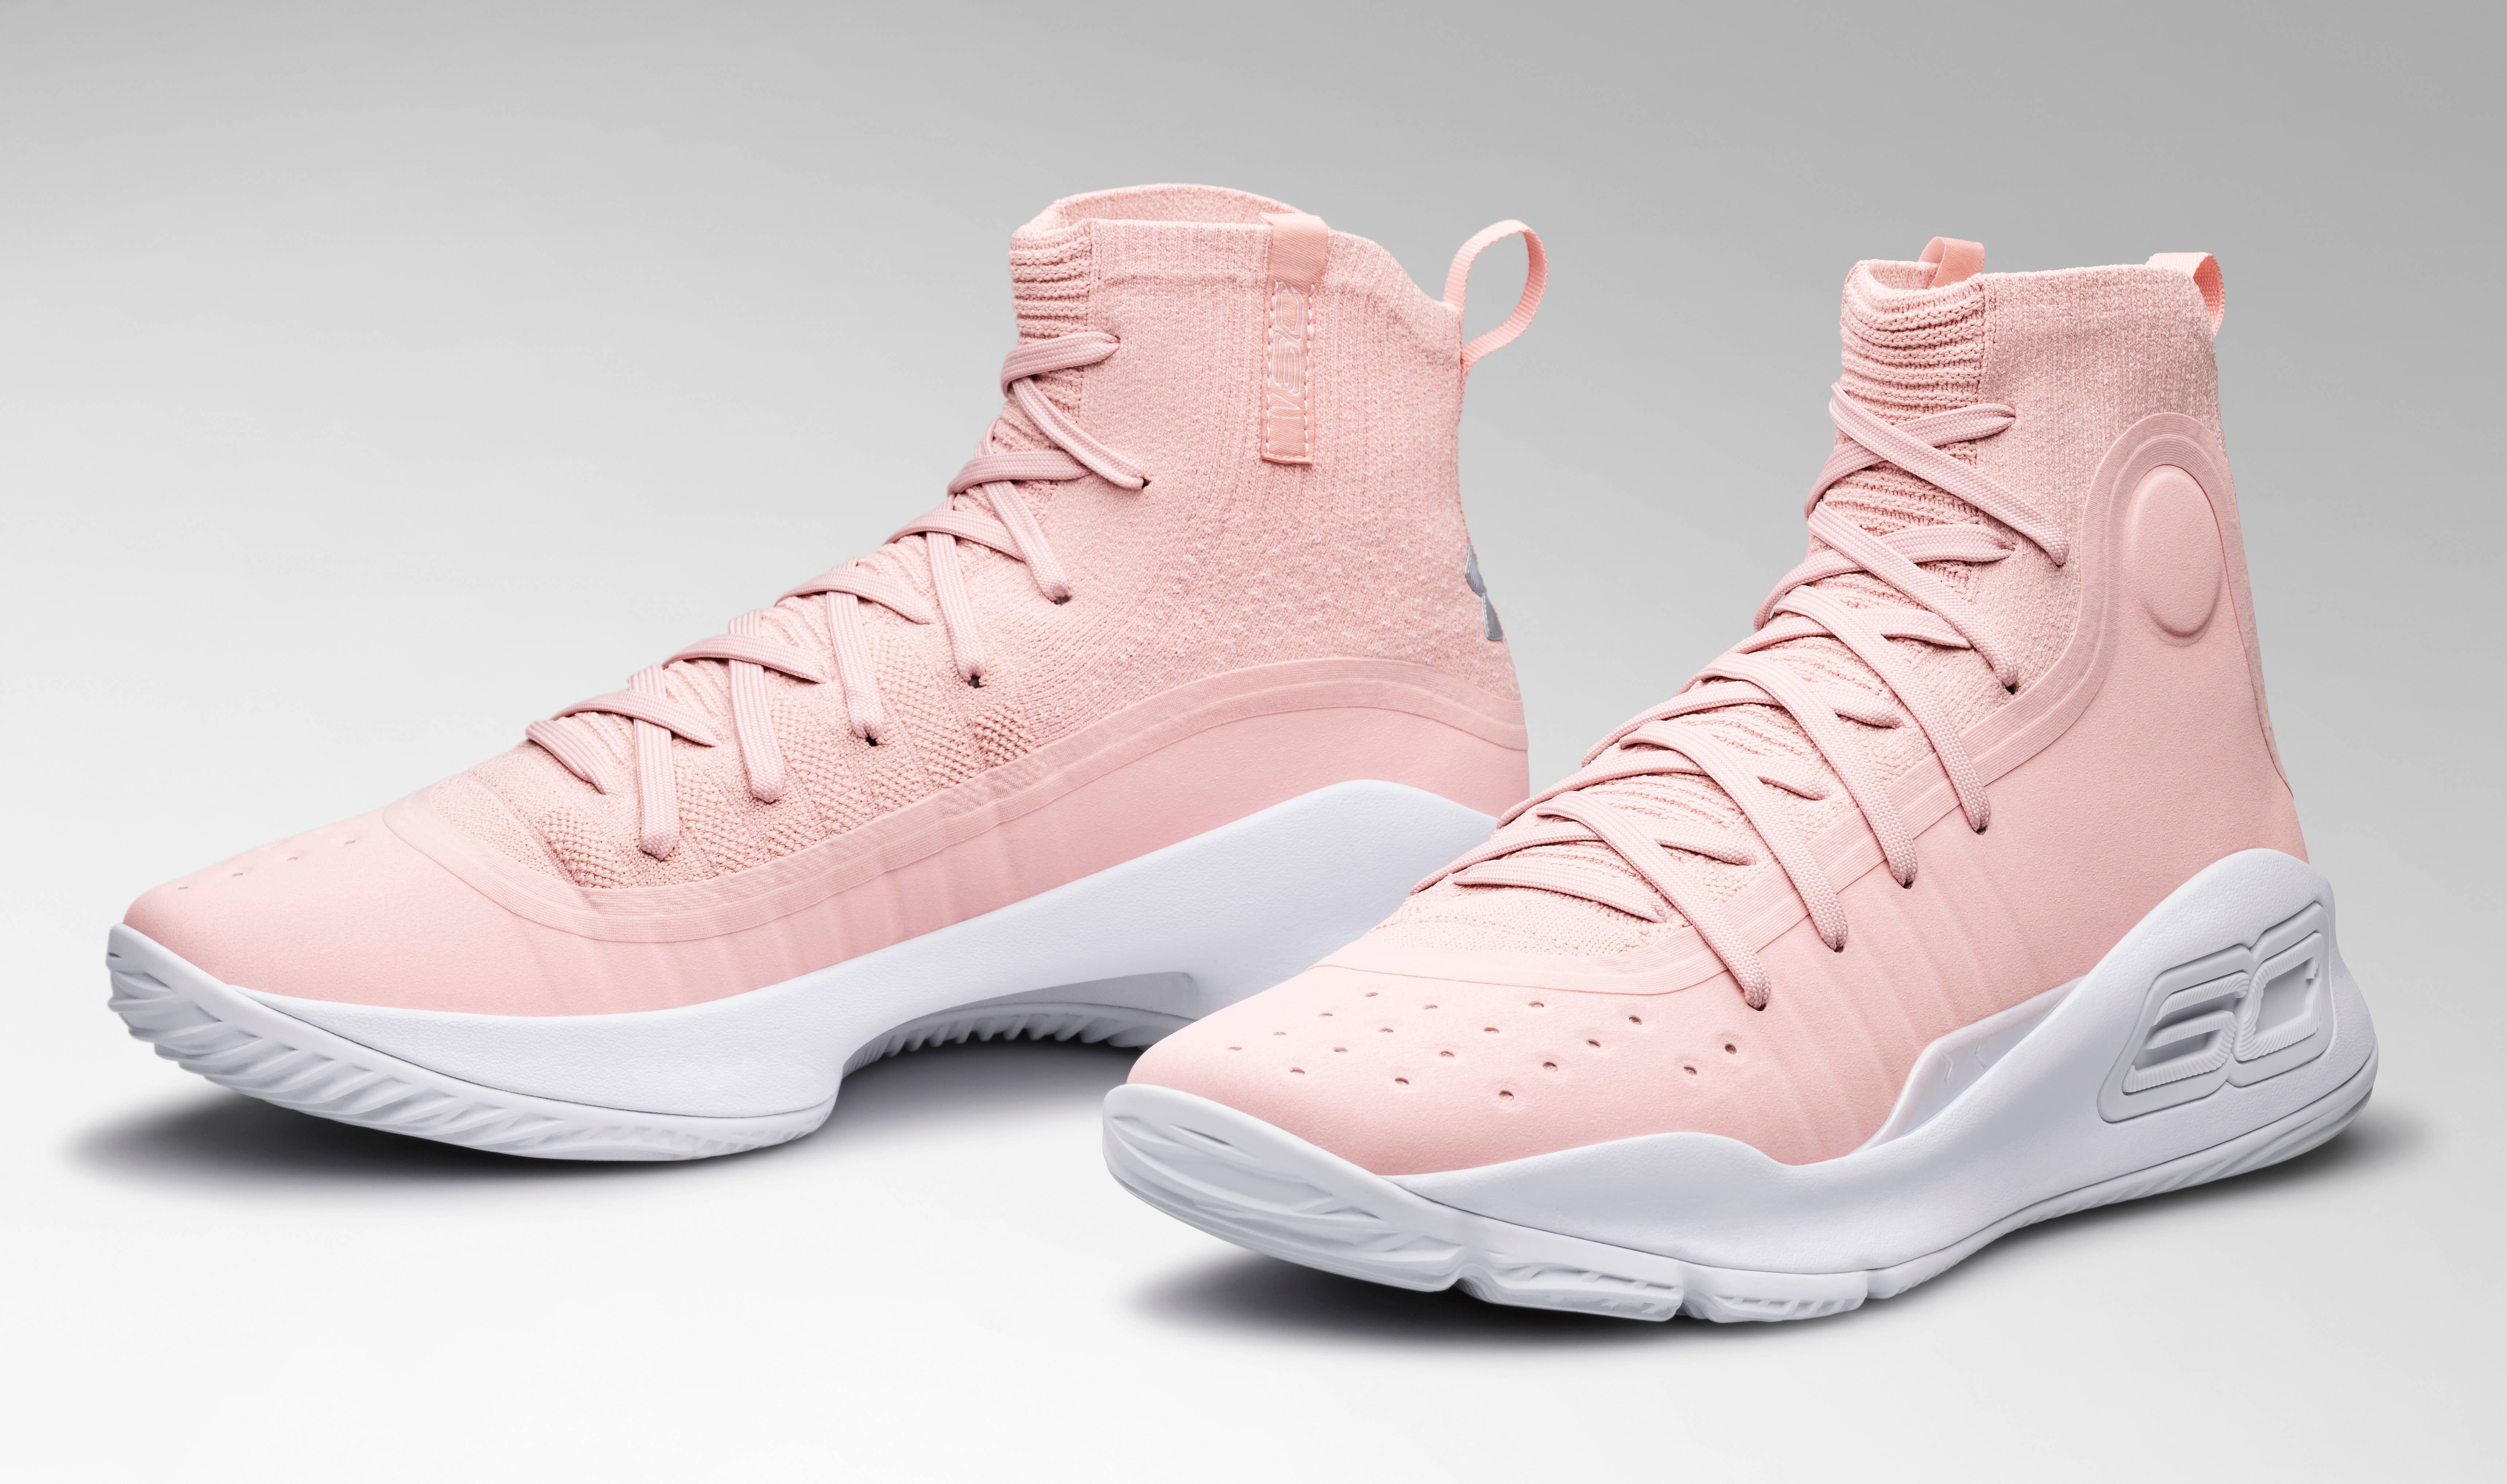 Under Armour Curry 4 'Flushed Pink' 1